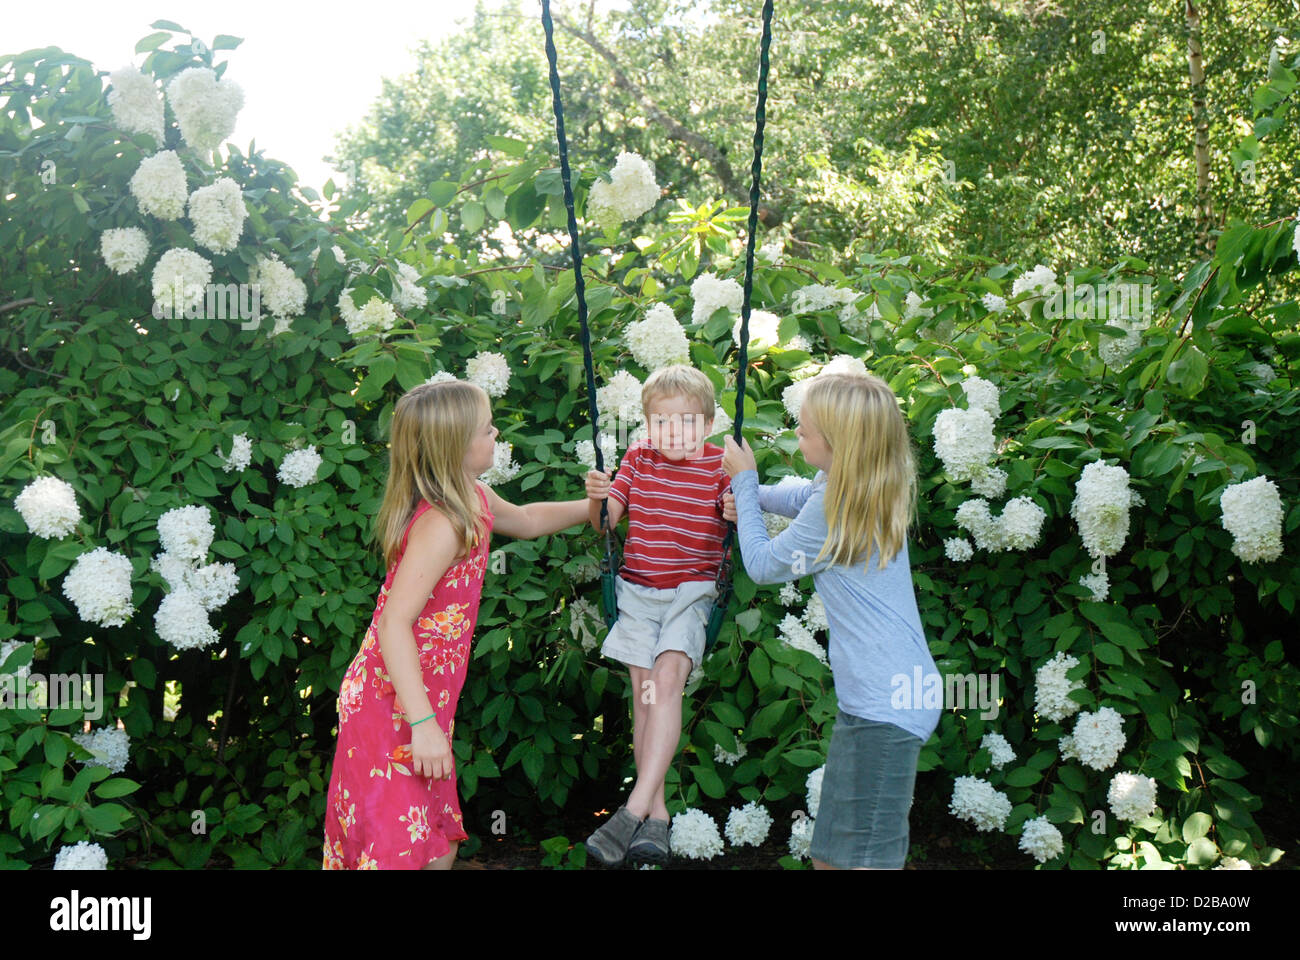 5 Year Old Boy On Swing With Sisters In Massachusetts Stock Photo